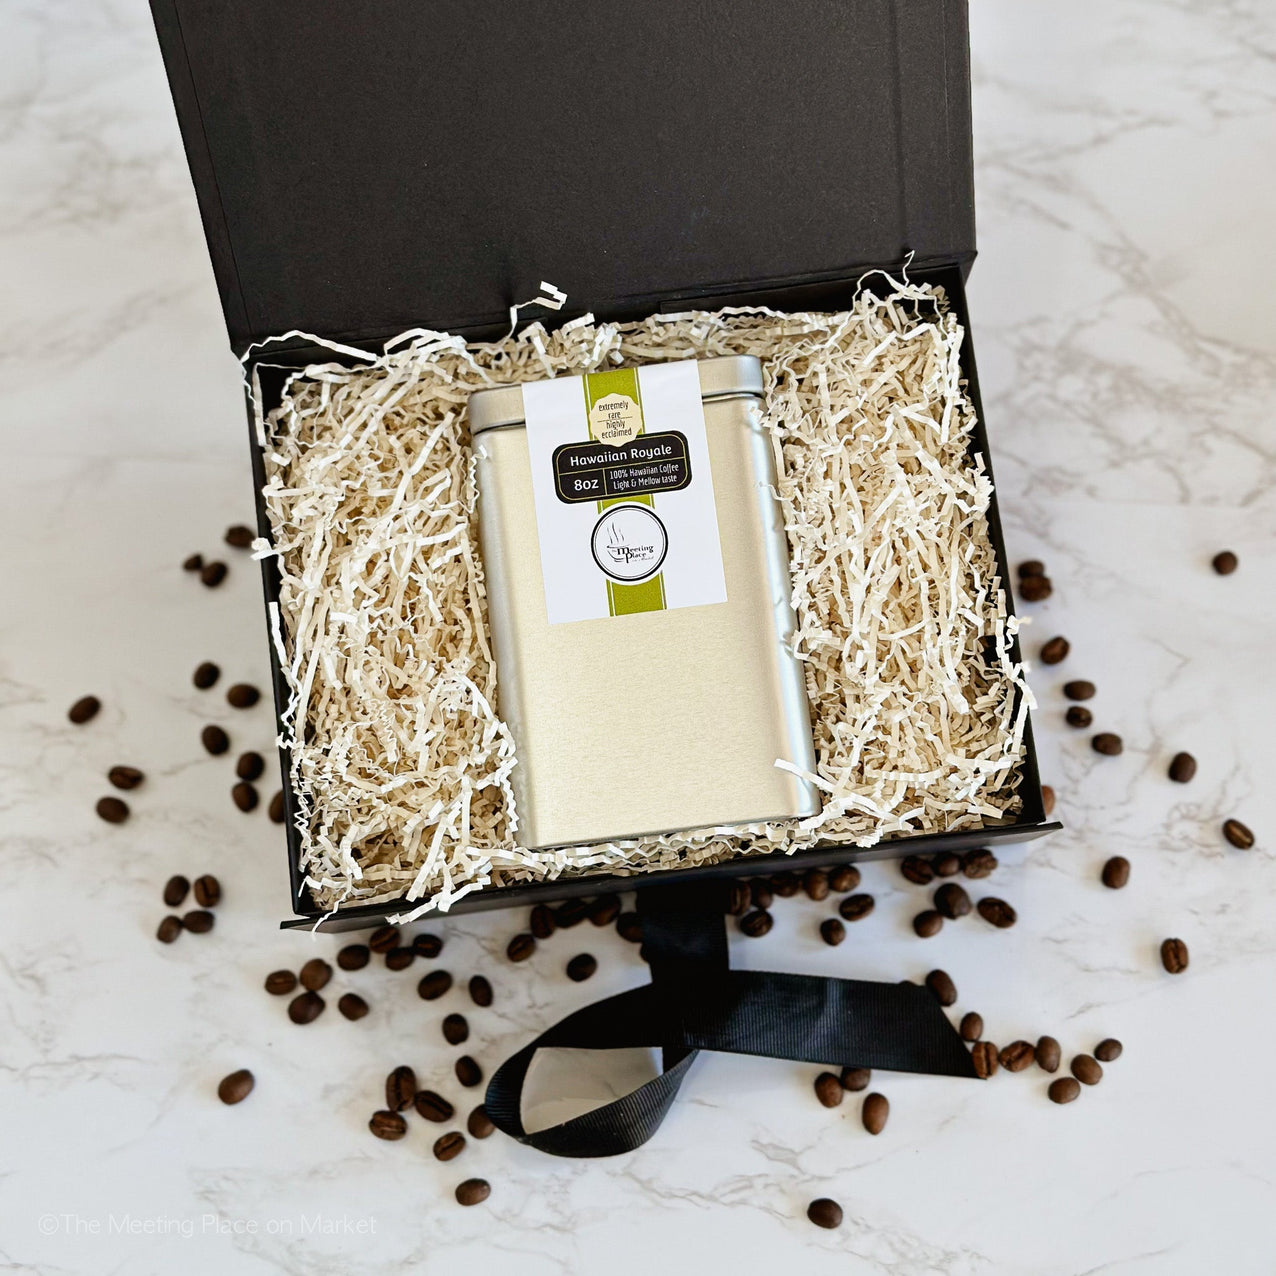 Luxury Coffee Gift Box with Hawaiian Royale Coffee, 100% Hawaiian Coffee from Maui Gourmet Coffee - The Meeting Place on Market